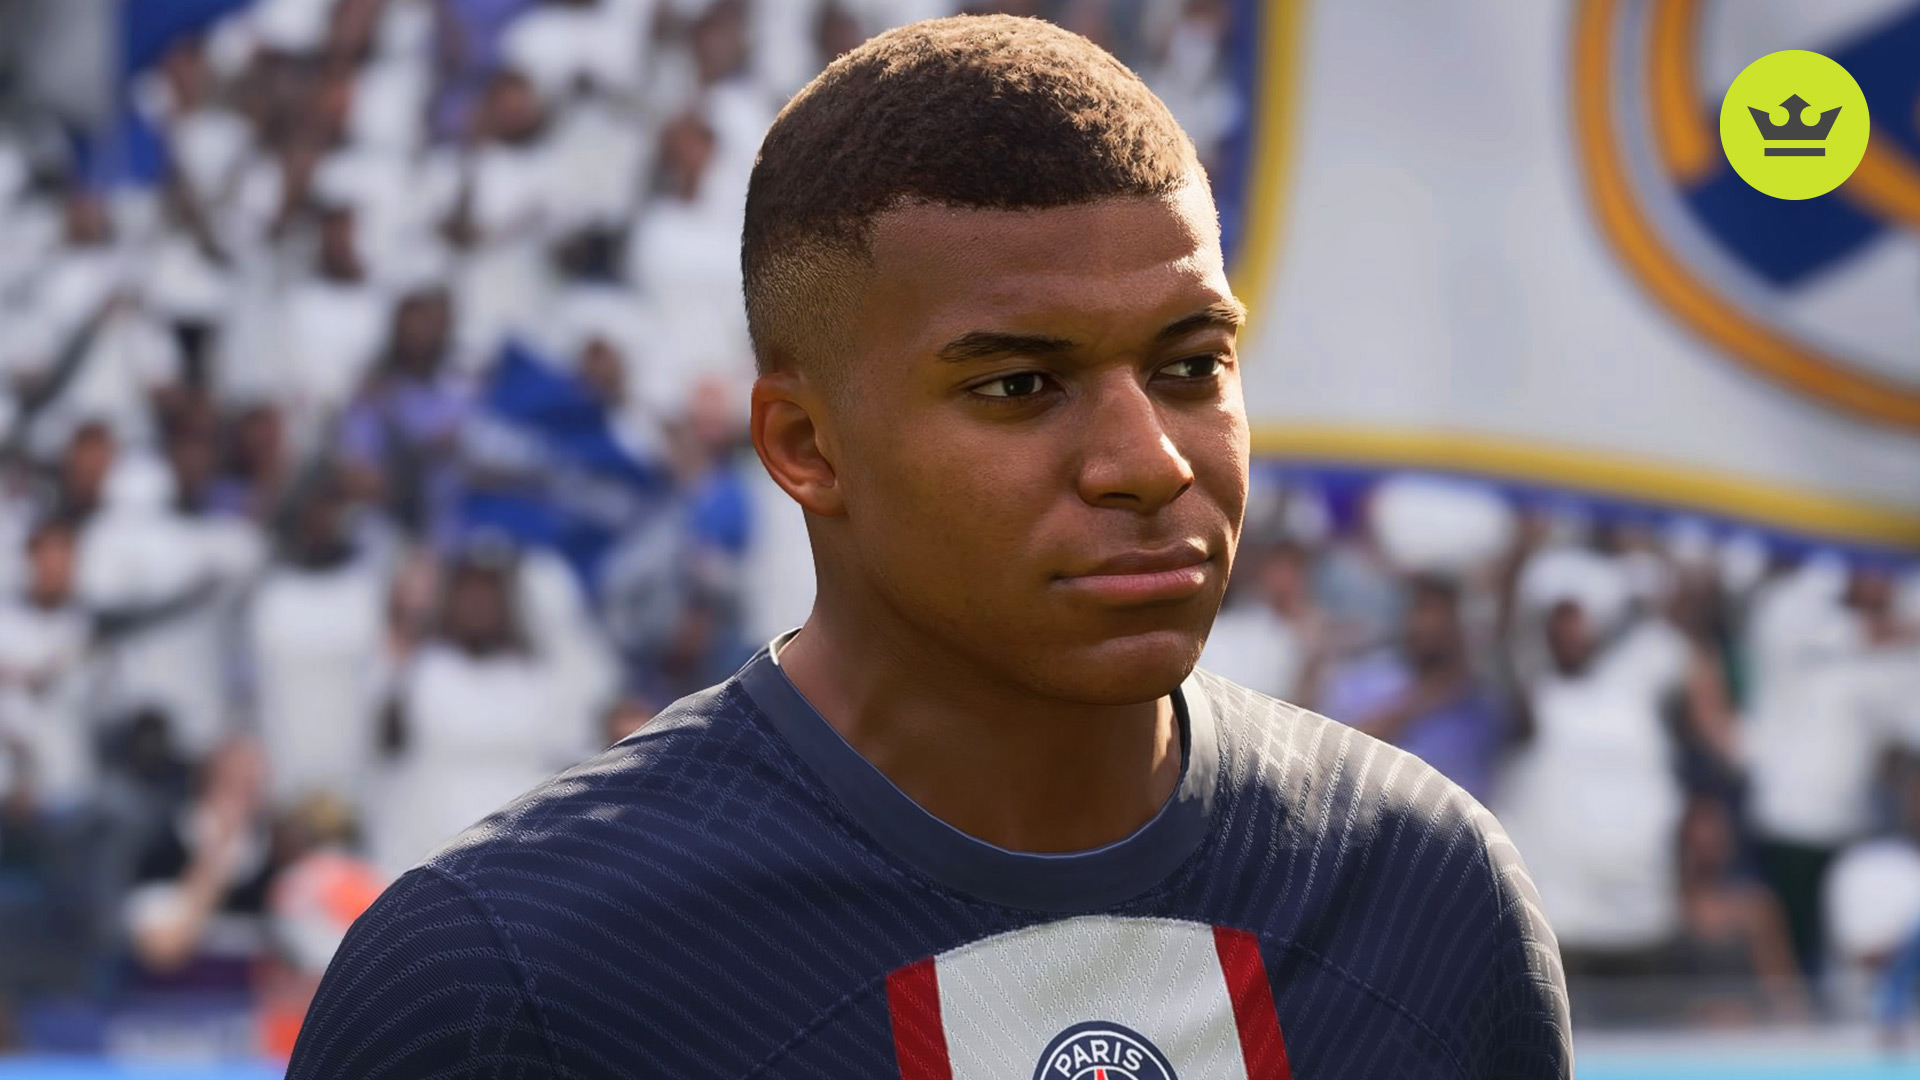 Spurs Faces and ratings EA FC 24 